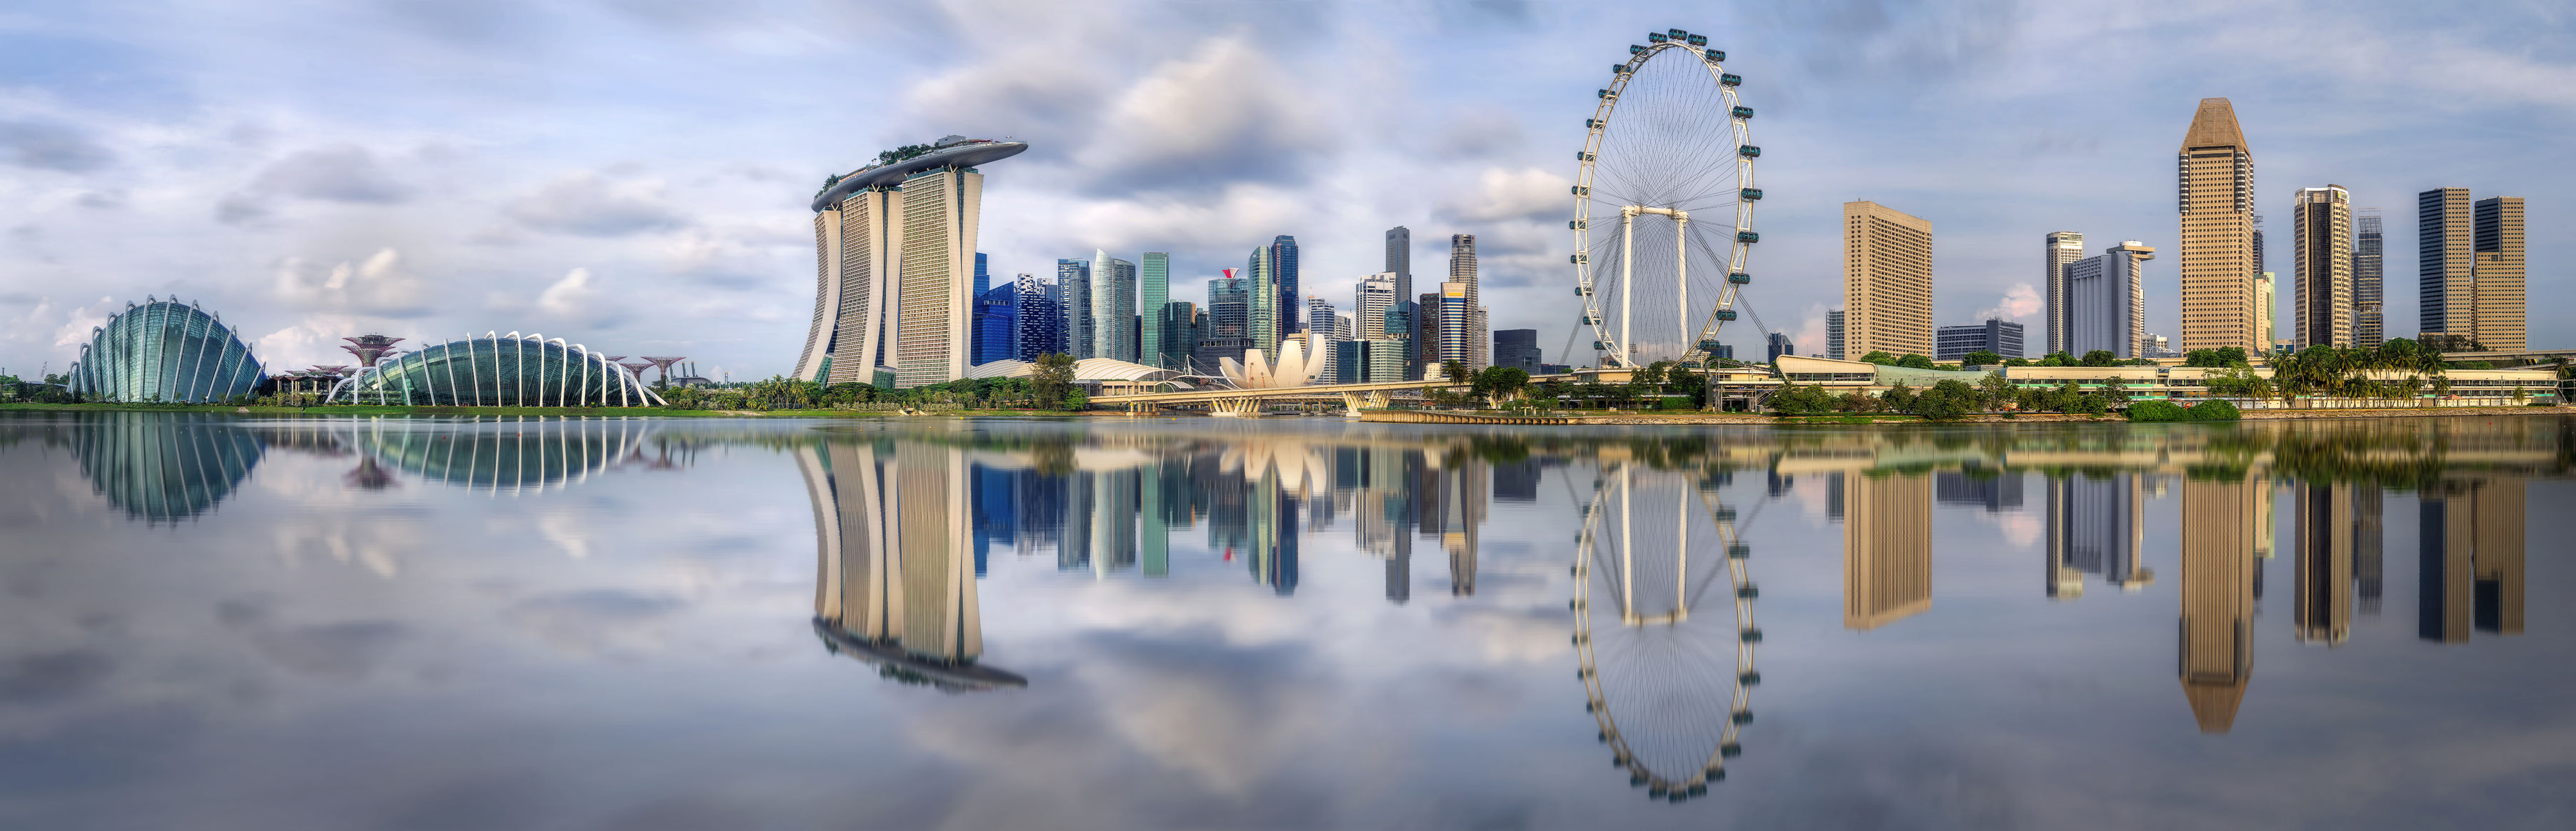 Singapore Personal Data Protection Reforms In Force From Next Year.